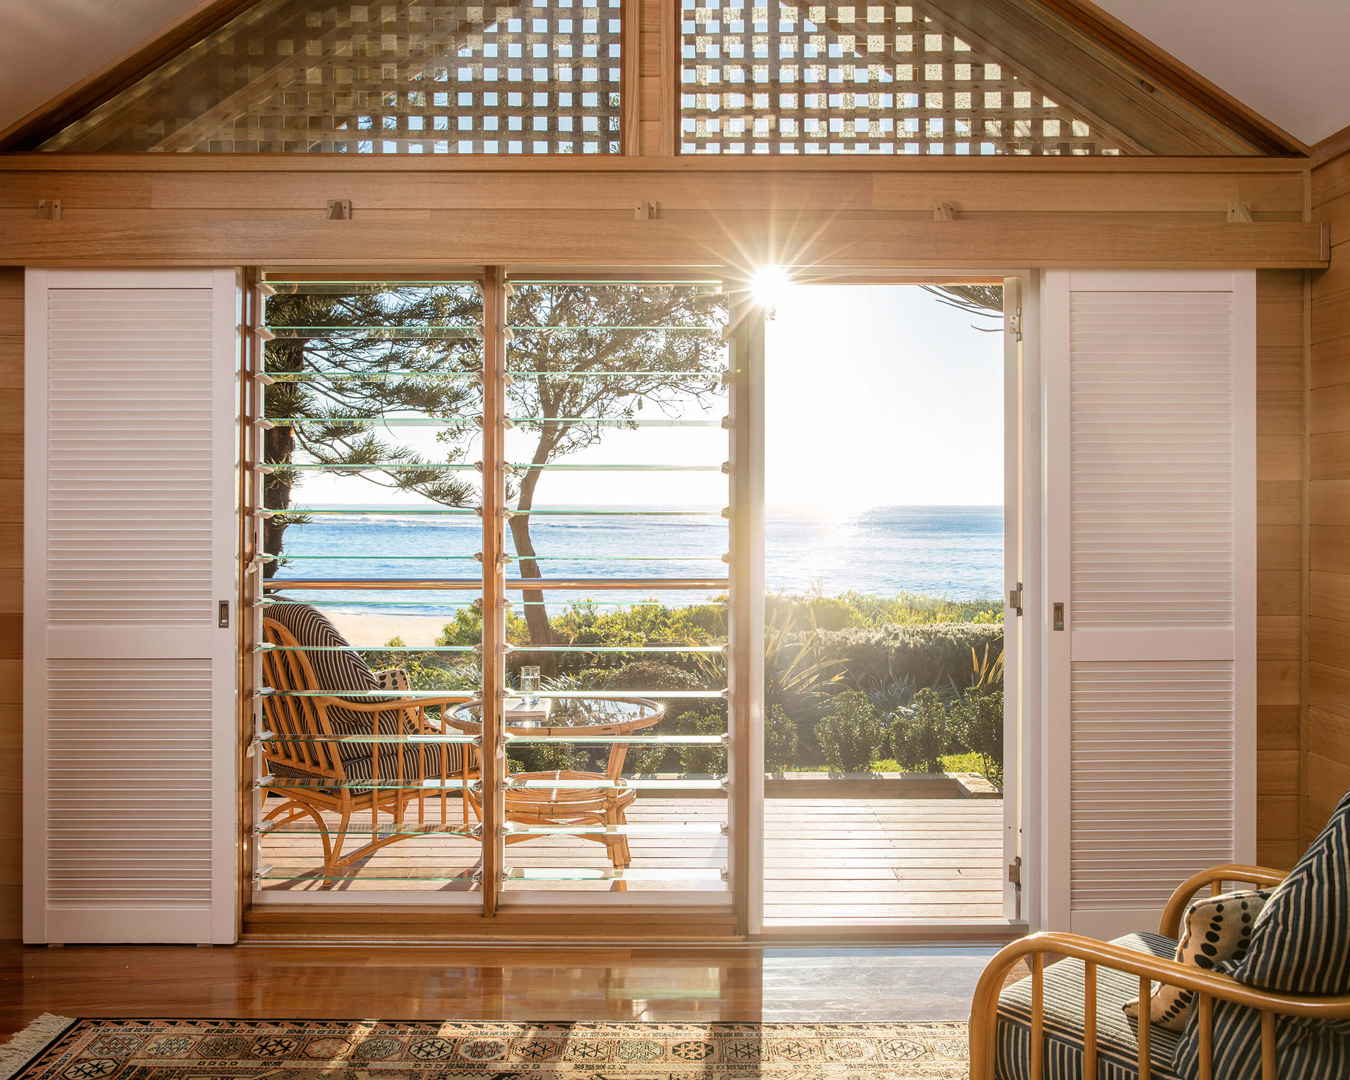 Kims Beachside Retreat, which is some of the best accommodation on the Central Coast